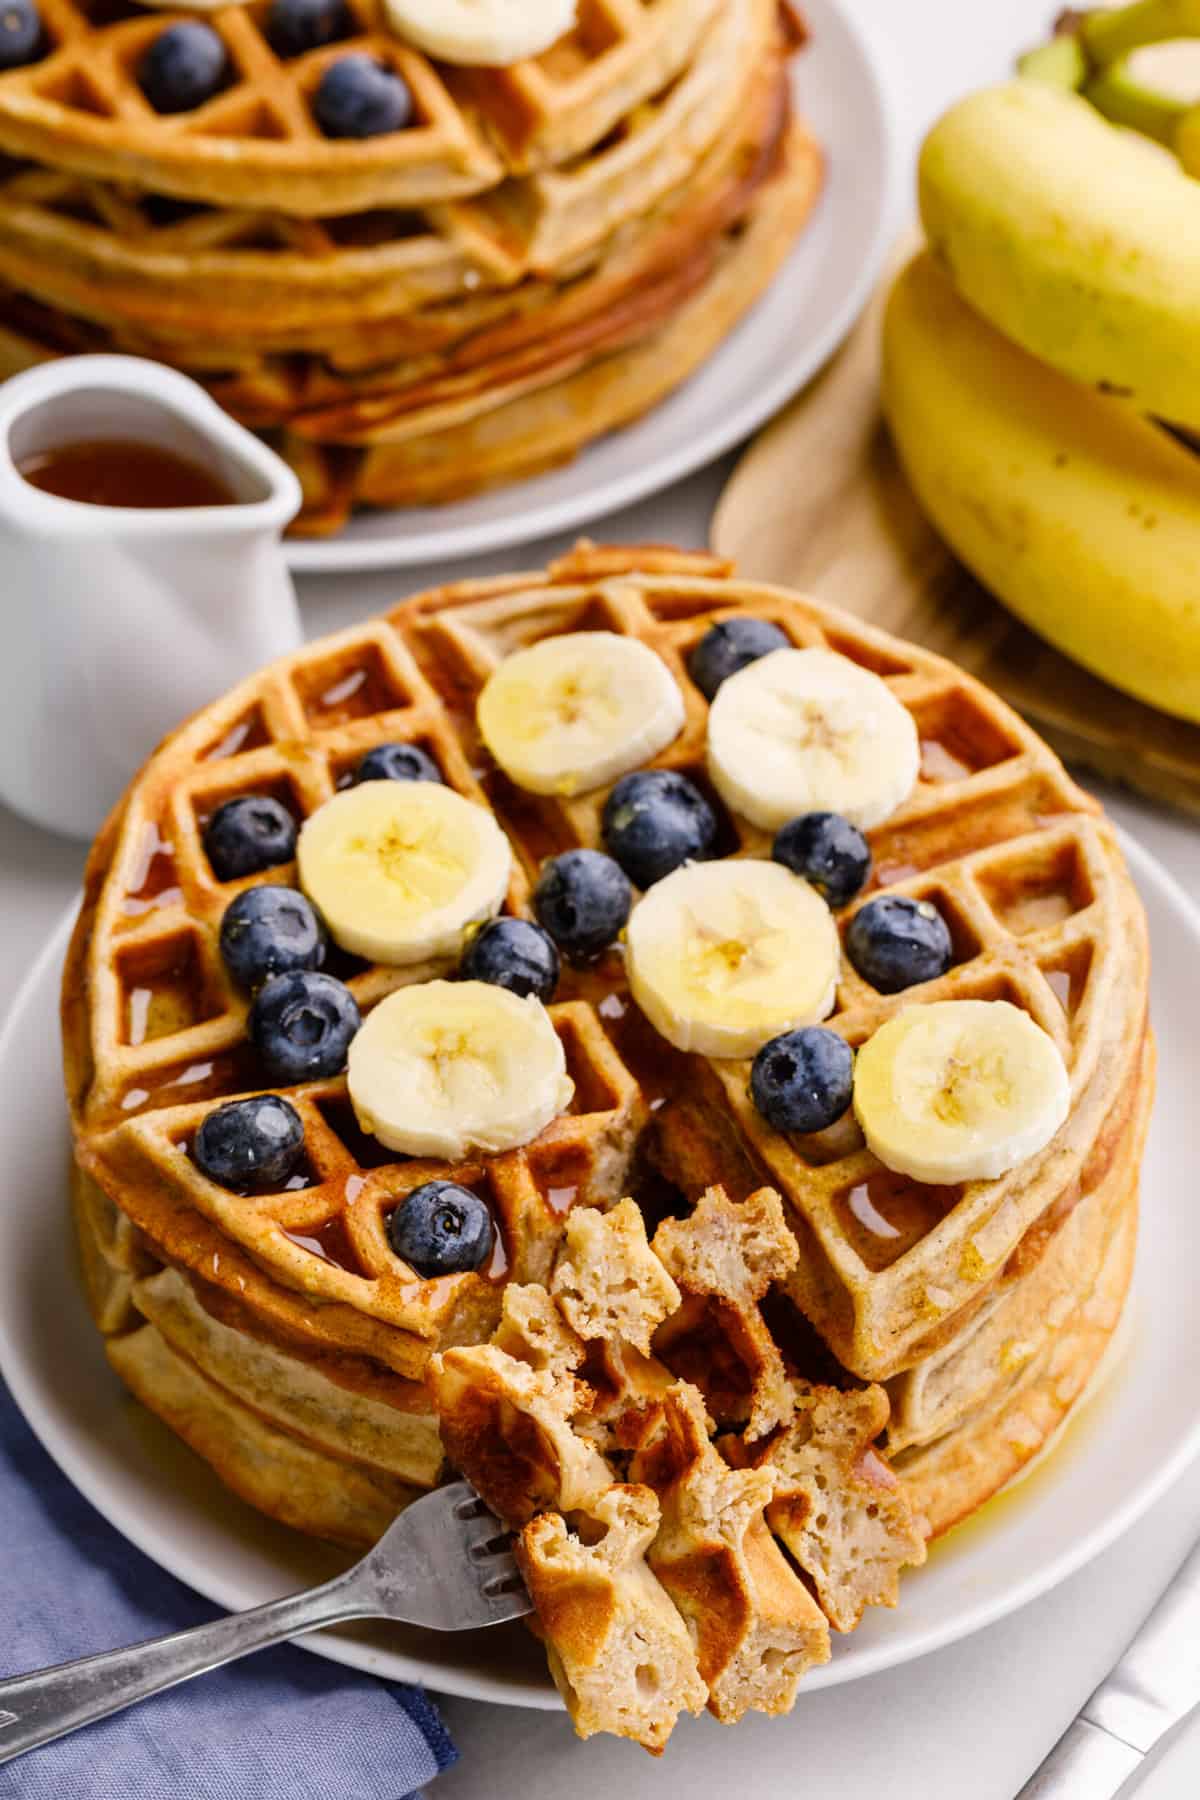 cross section shown of a stack of banana pancakes topped with sliced fresh bananas, blueberries and syrup